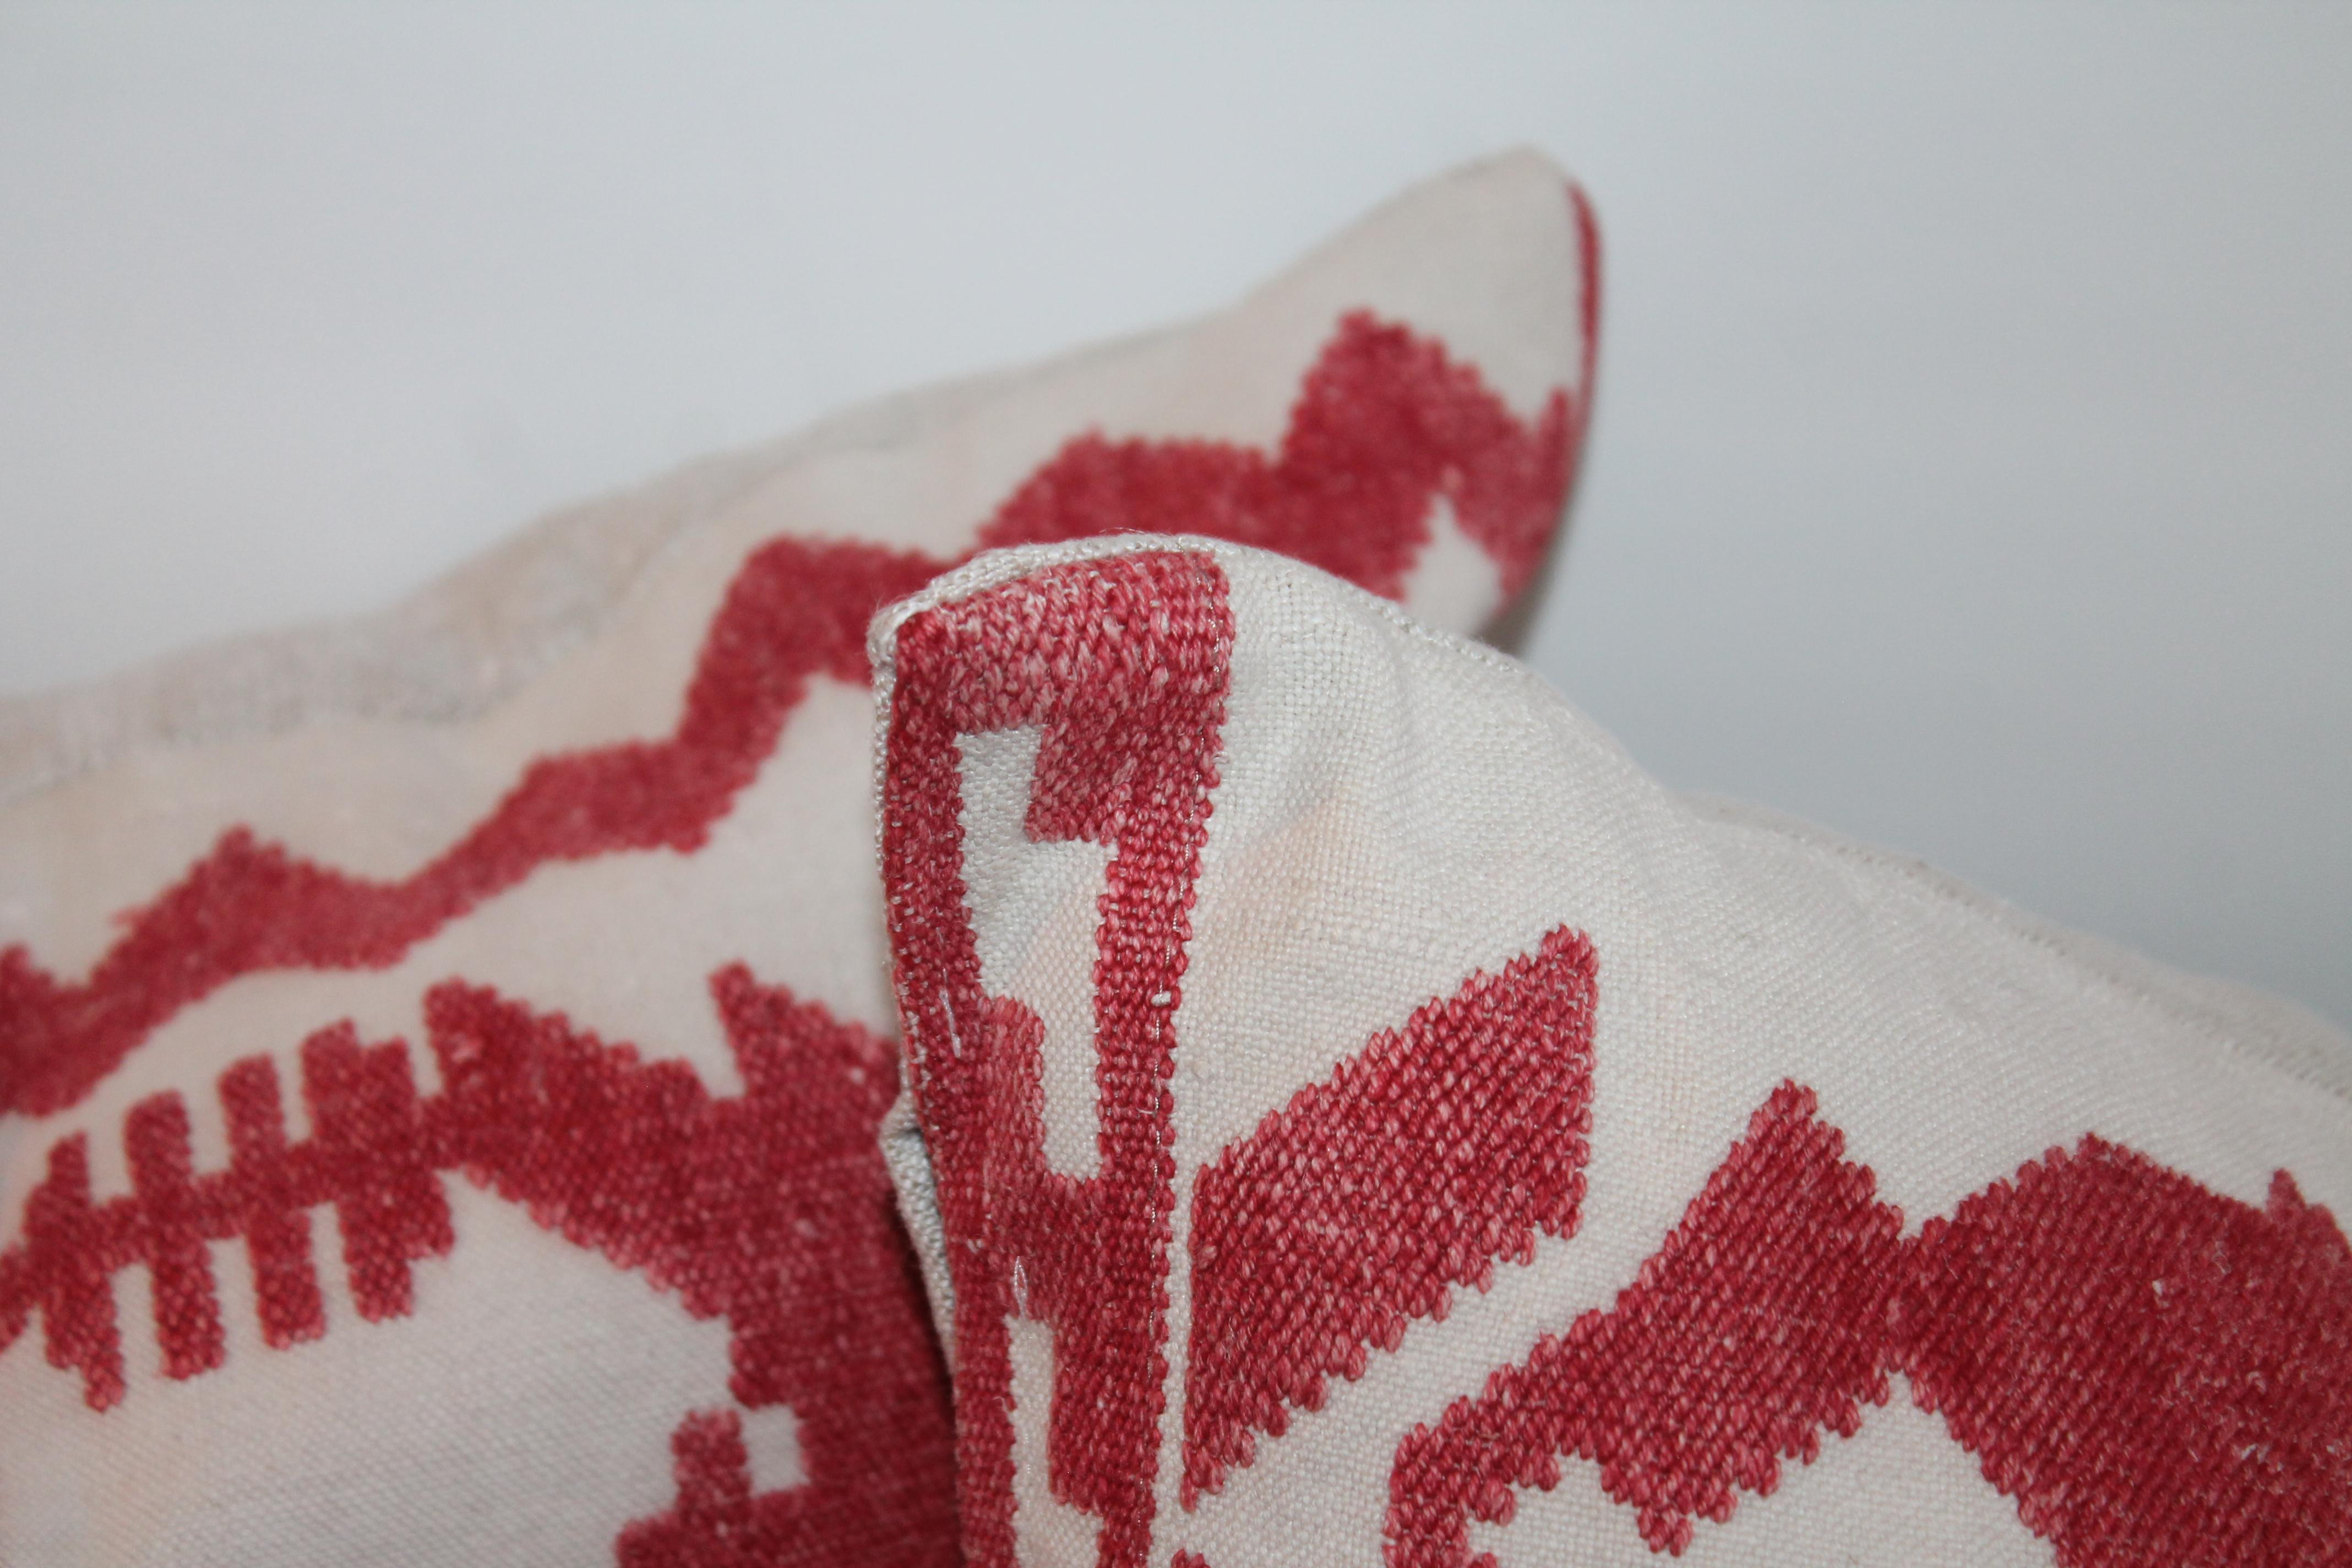 These amazing hand embroidered red threading on linen pillows are in fine condition. The pillows have side ties and down and feather inserts. One pair in stock.